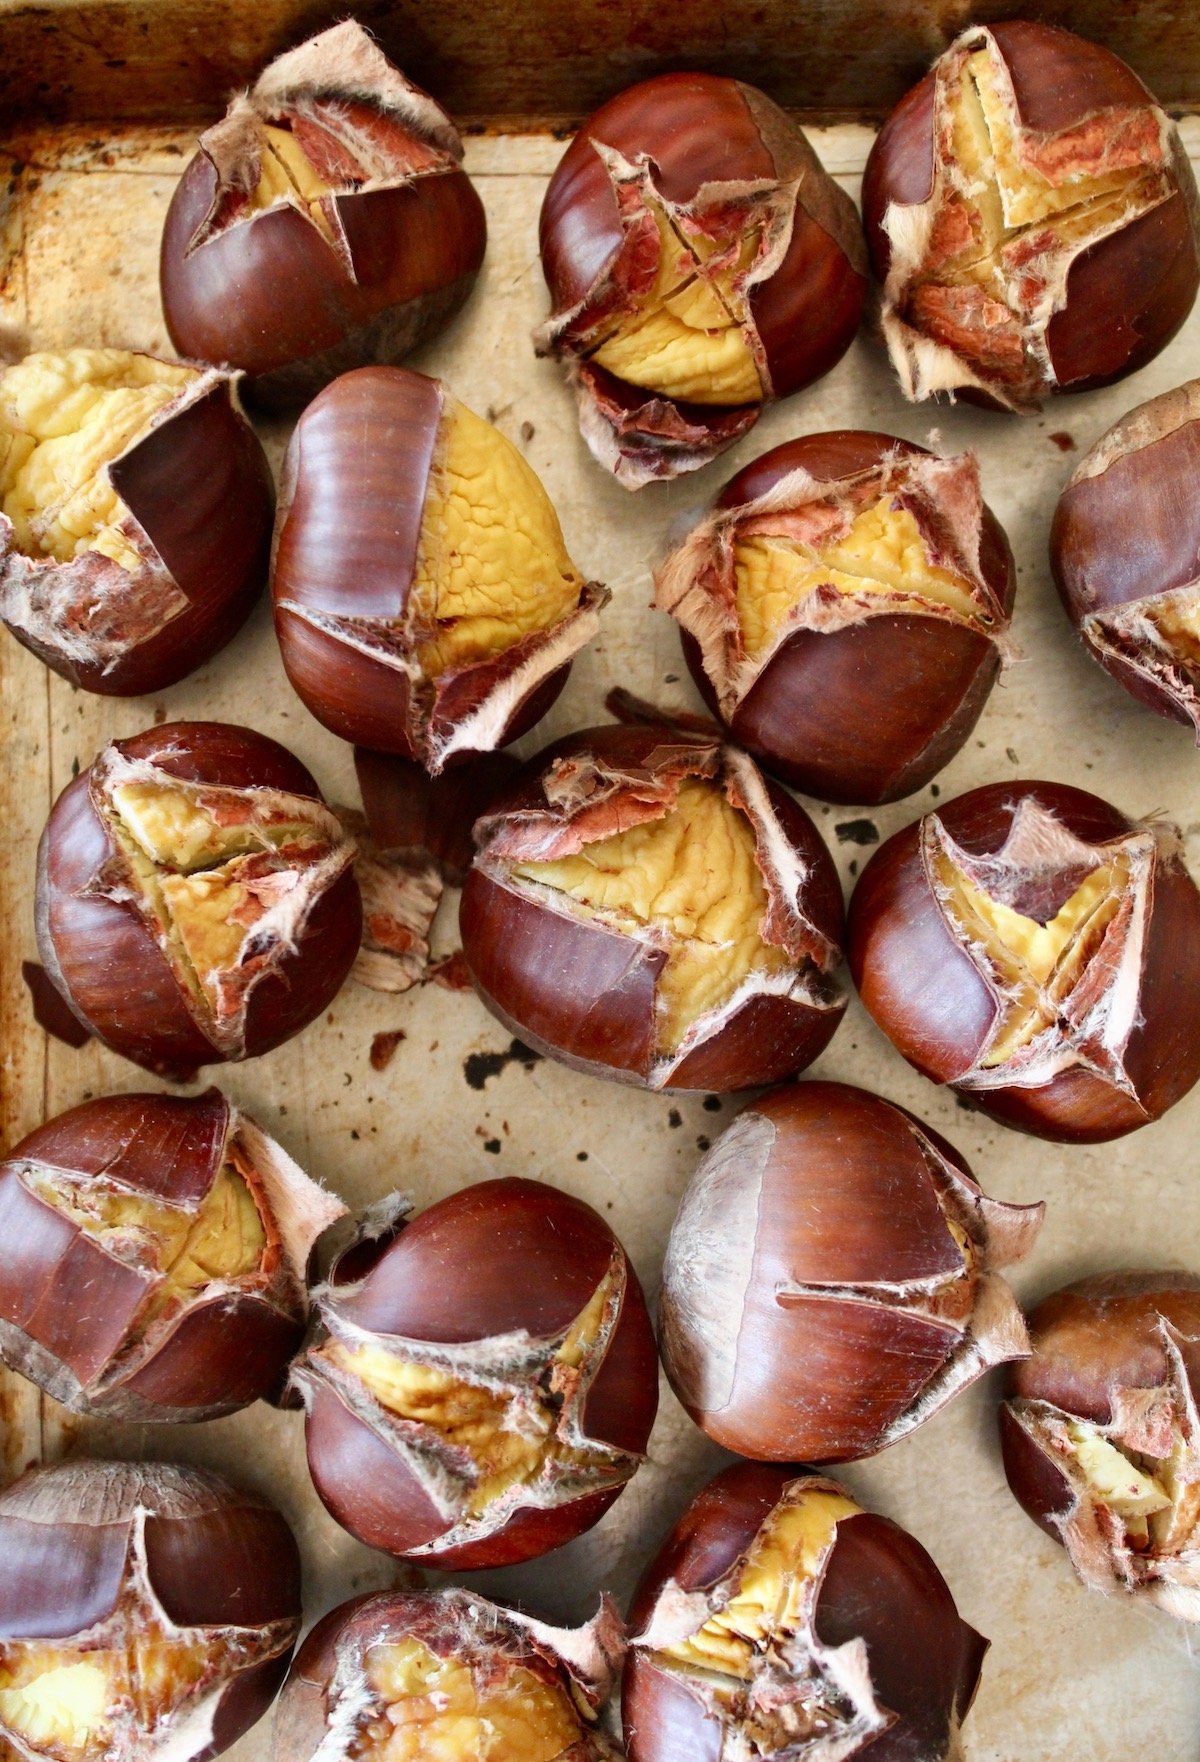 several chestnuts on baking sheet with shells split open